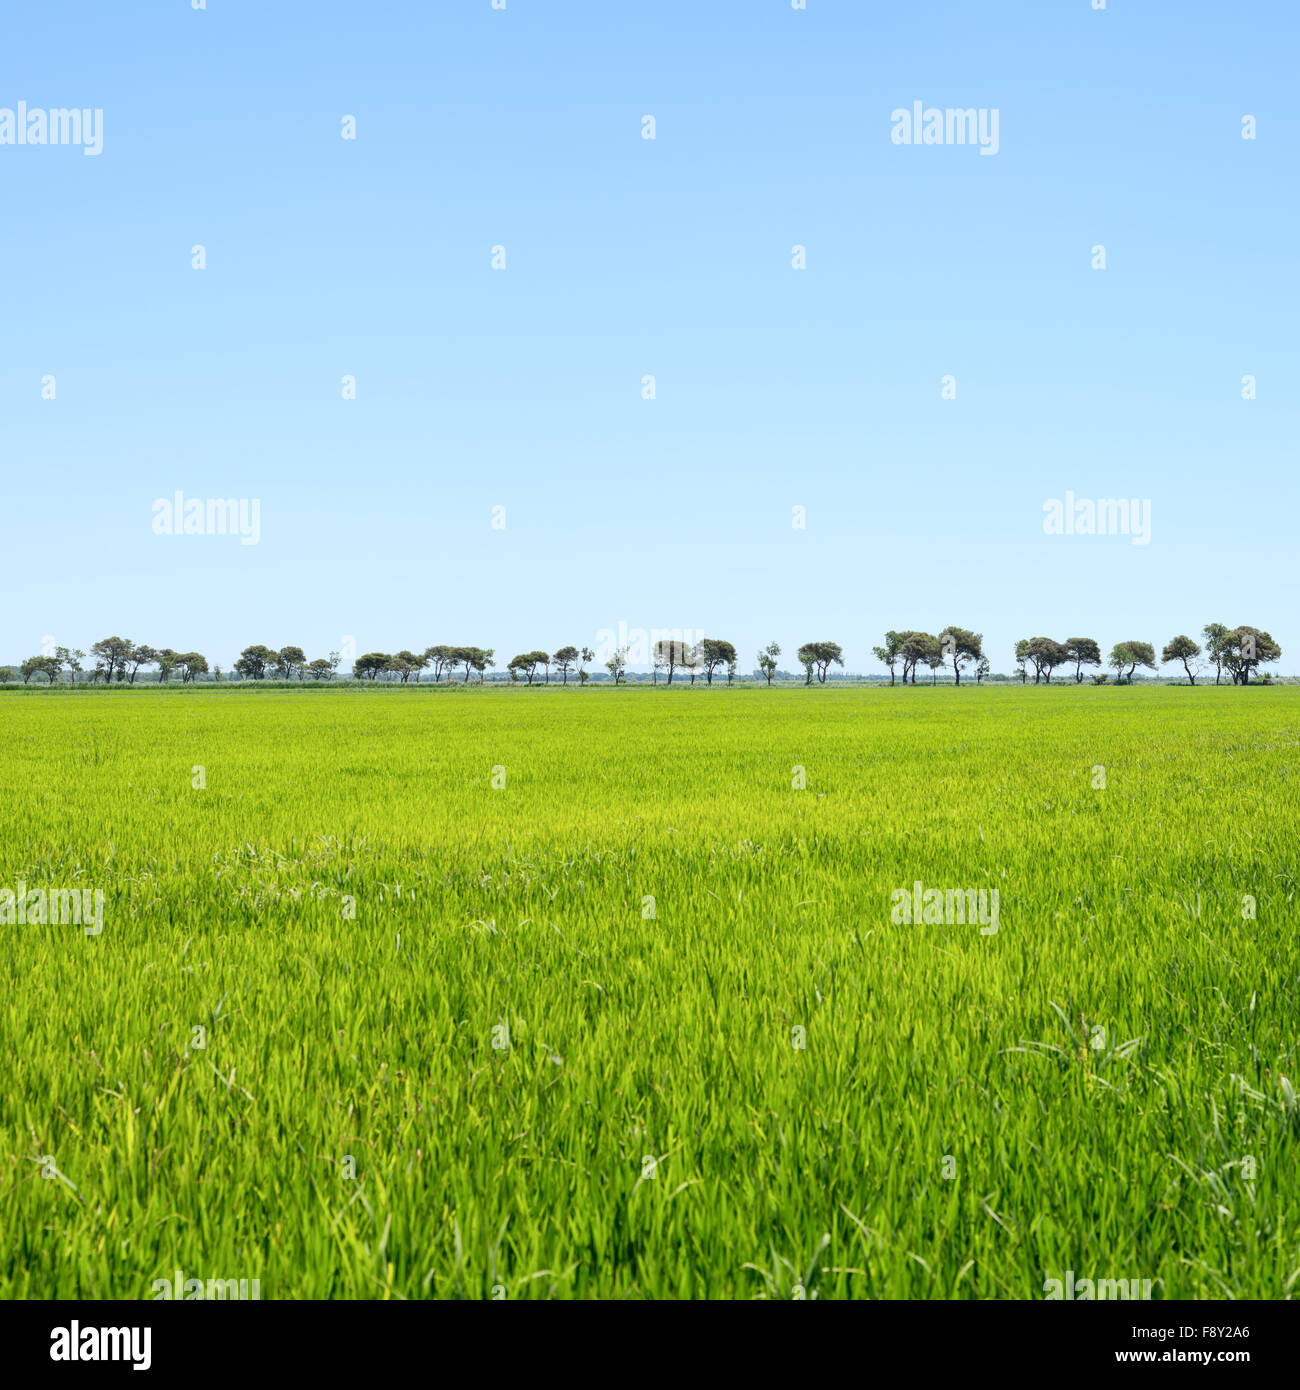 Trees in a row and green field. Camargue Rhone park, Provence, France Stock Photo